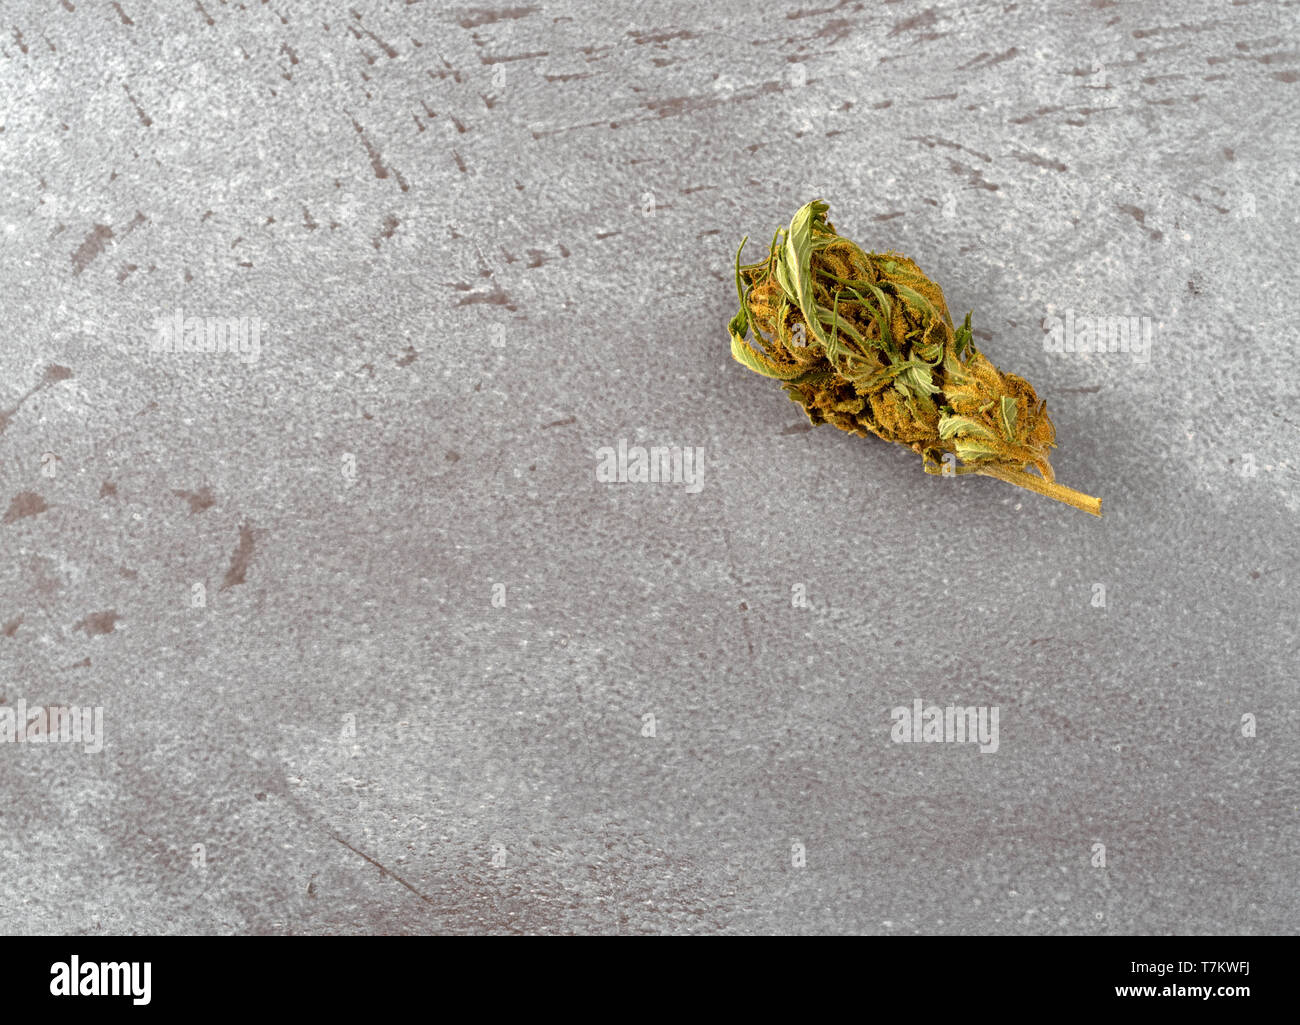 Top view of a marijuana bud offset on a gray table illuminated with natural light. Stock Photo